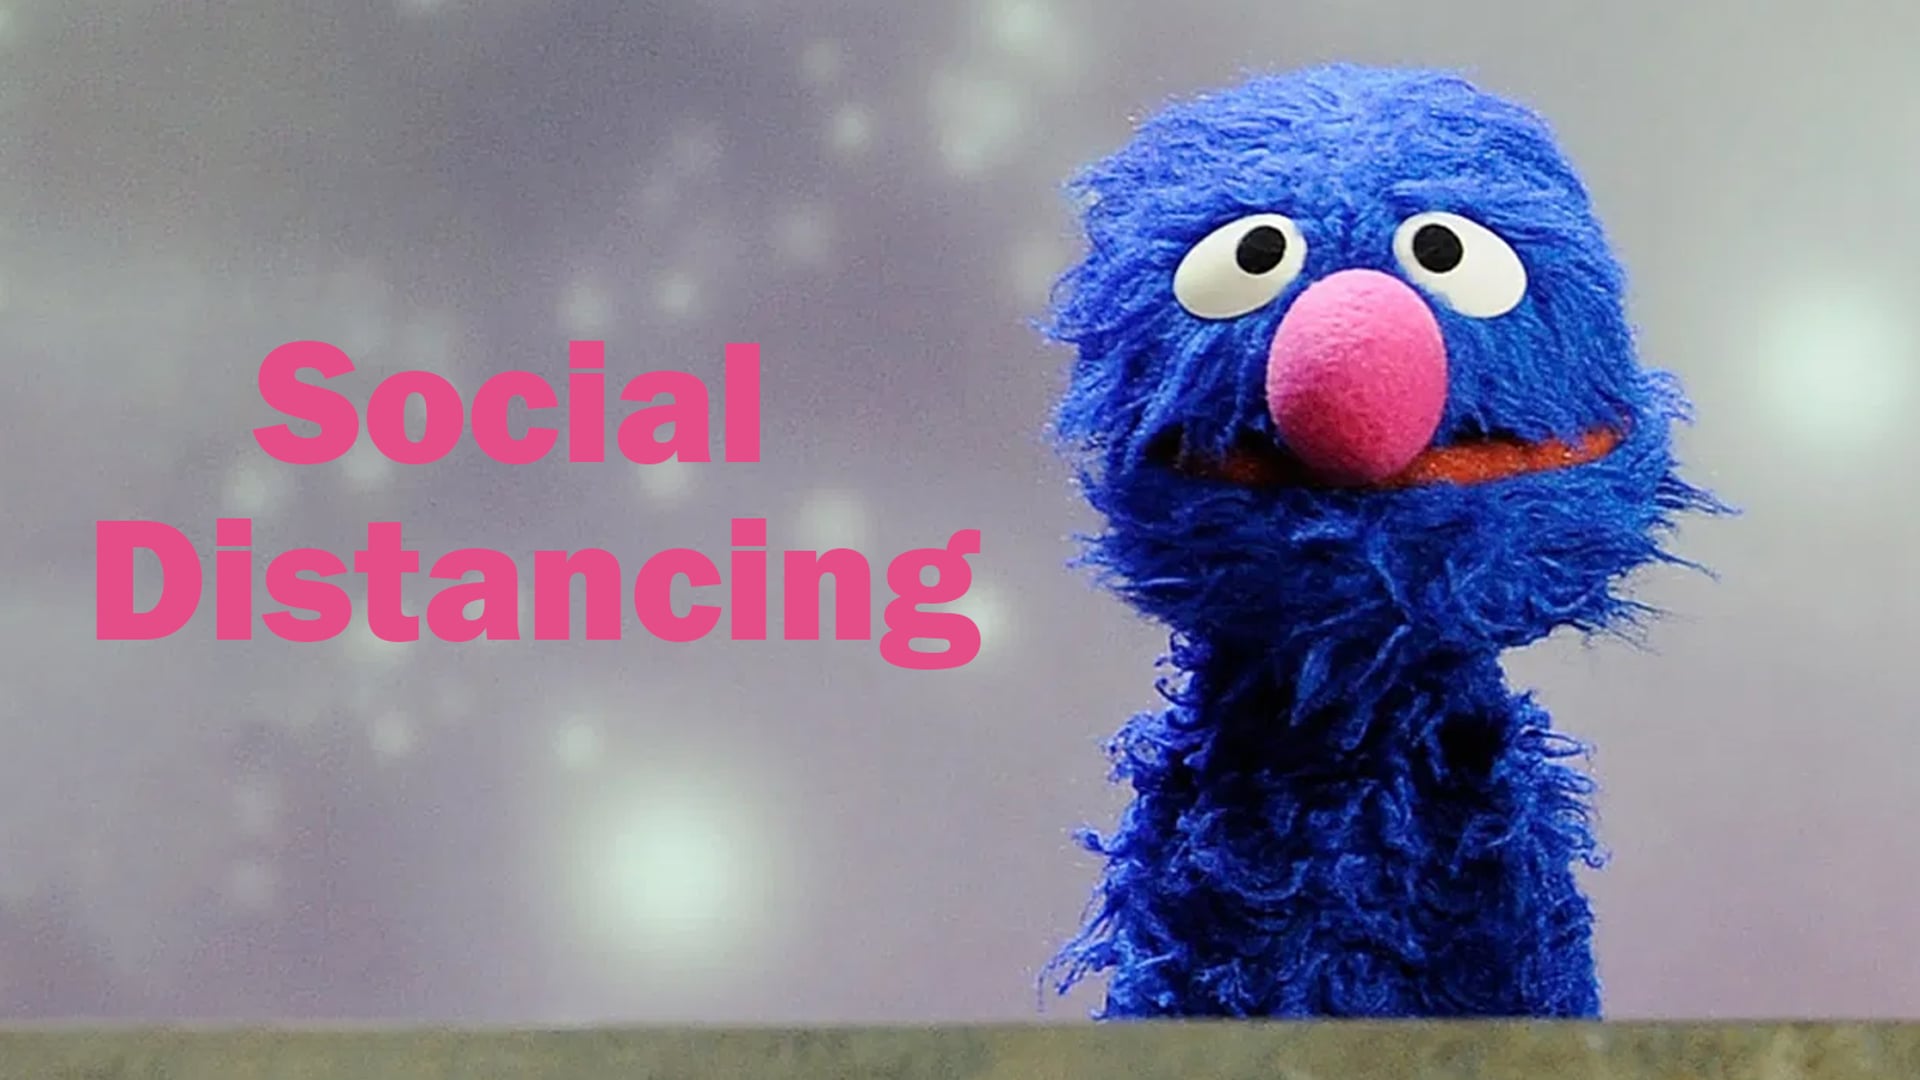 Social Distancing - Grover from Sesame Street